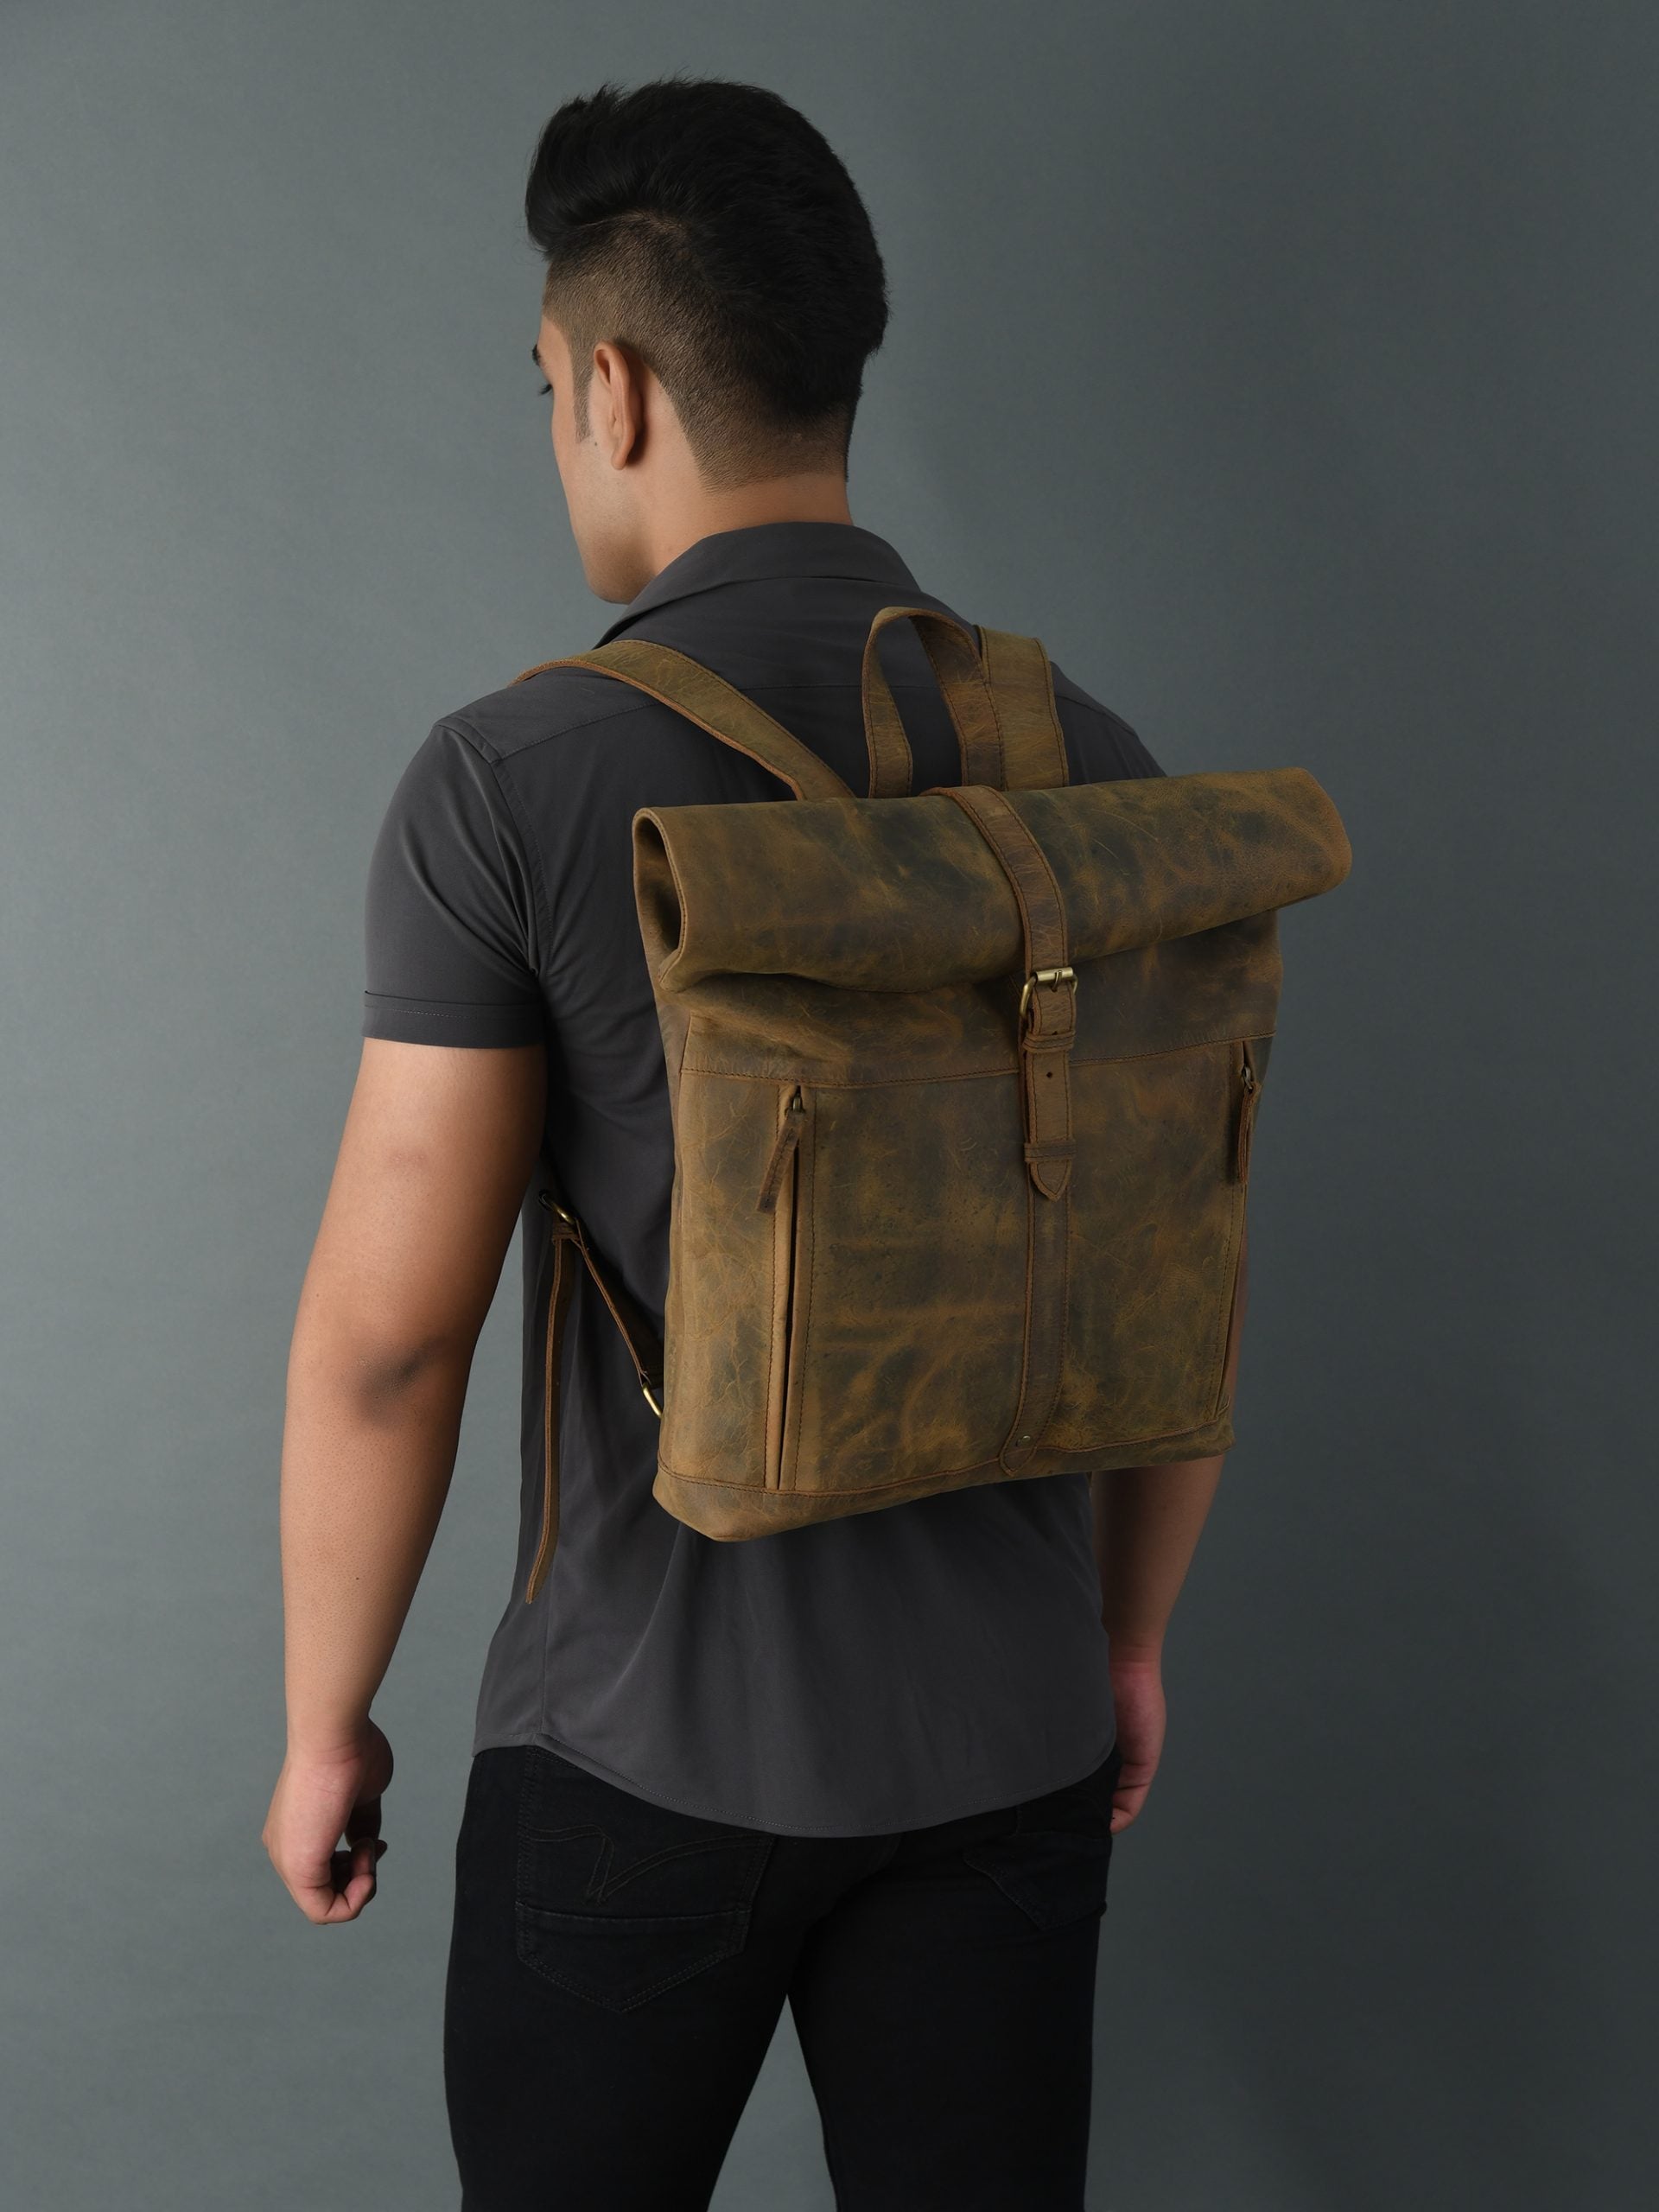 The Halk Roll Top Backpack